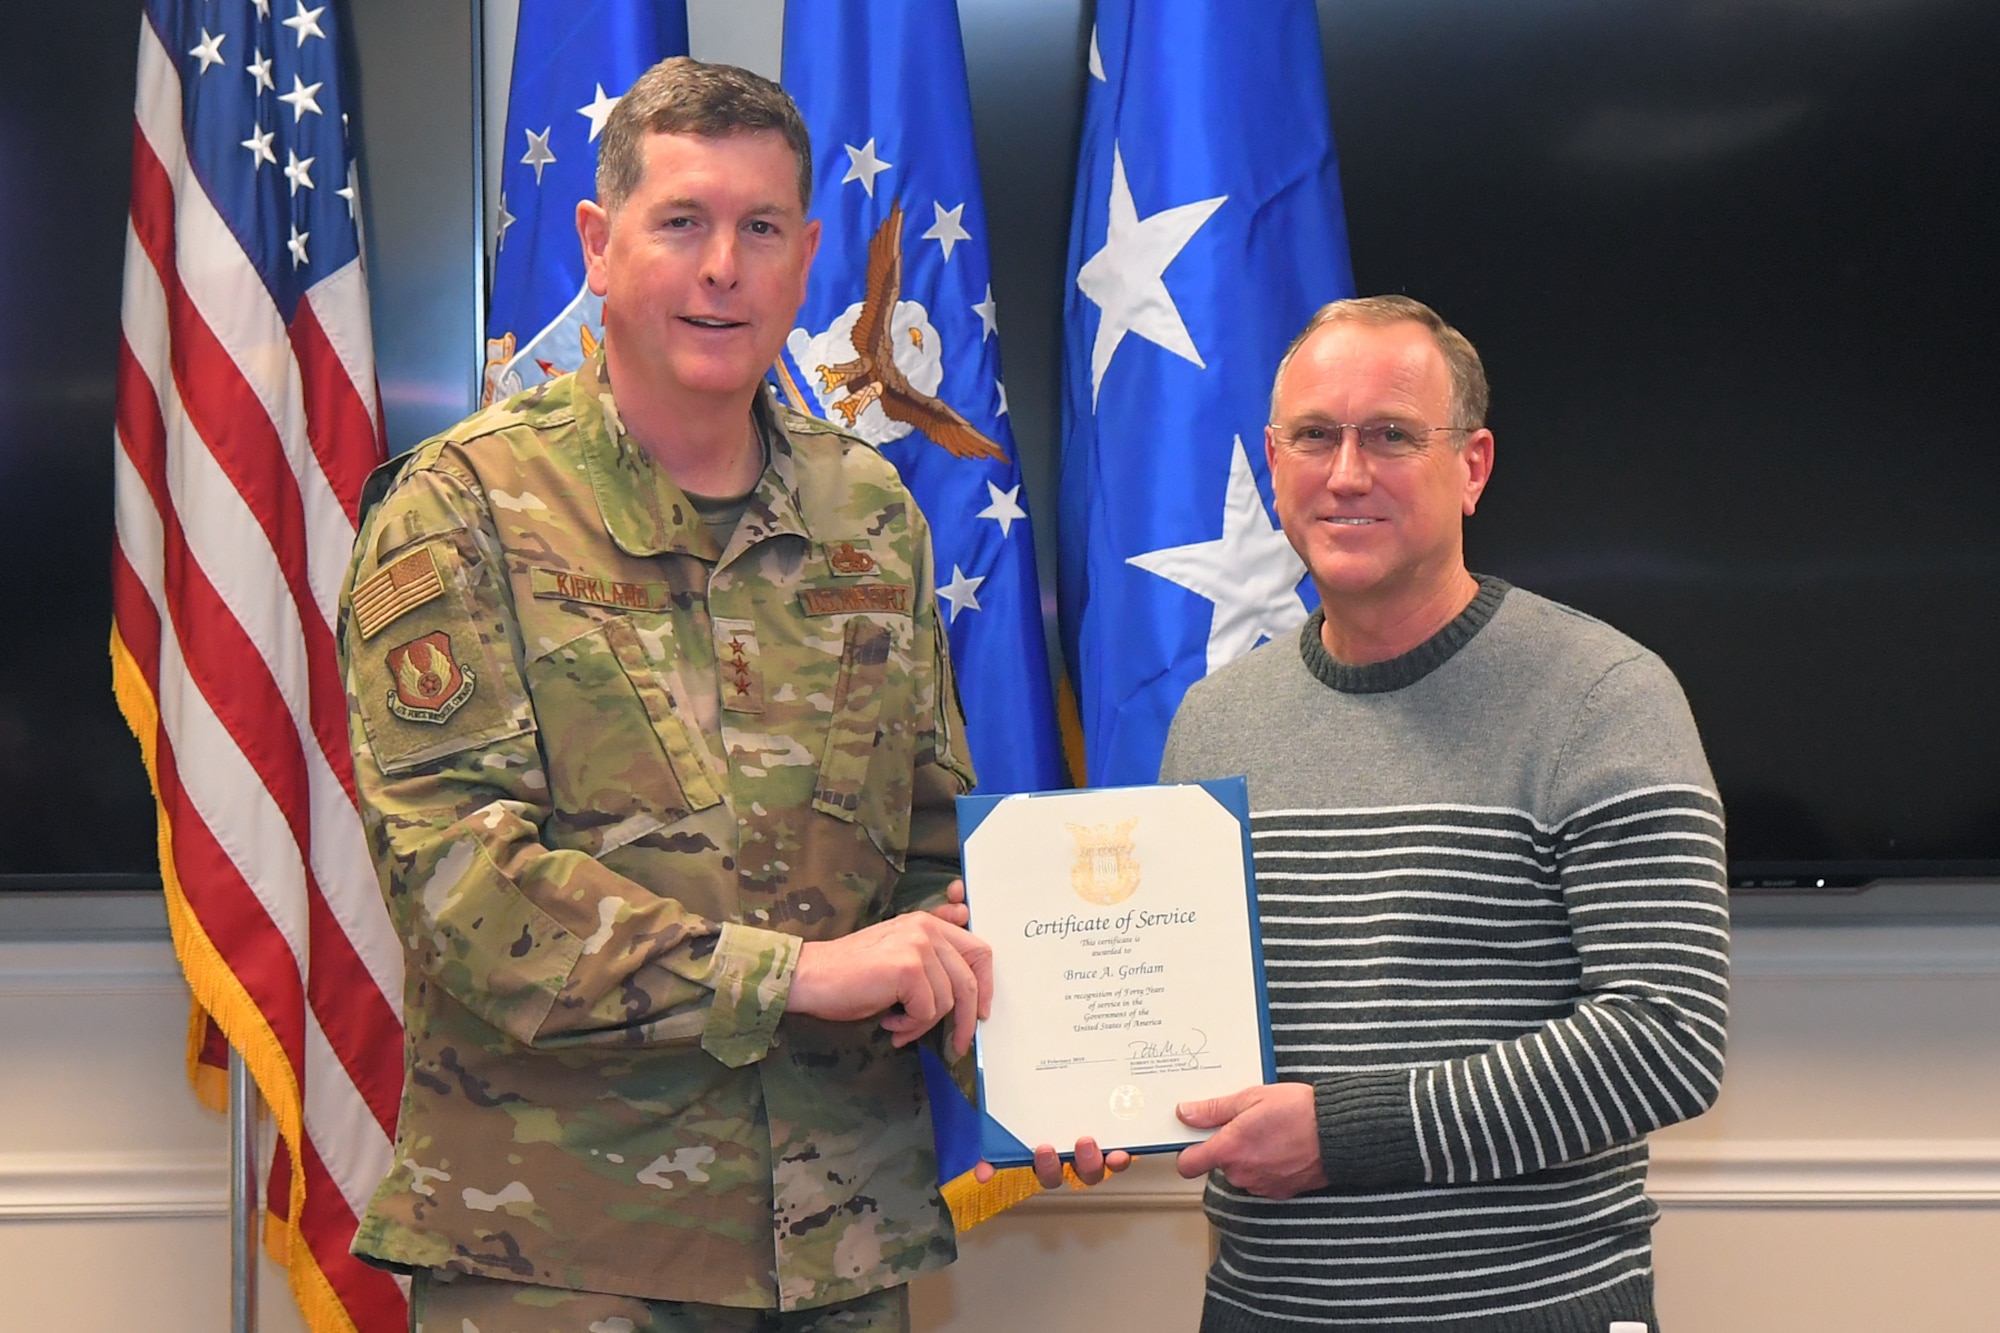 Bruce A. Gorham, 532nd Commodities Maintenance Squadron, receives a 40-year certificate of service from Lt. Gen Gene Kirkland, Air Force Sustainment Center commander, Feb. 4, 2019, at Hill Air Force Base, Utah. (U.S. Air Force photo by Todd Cromar)